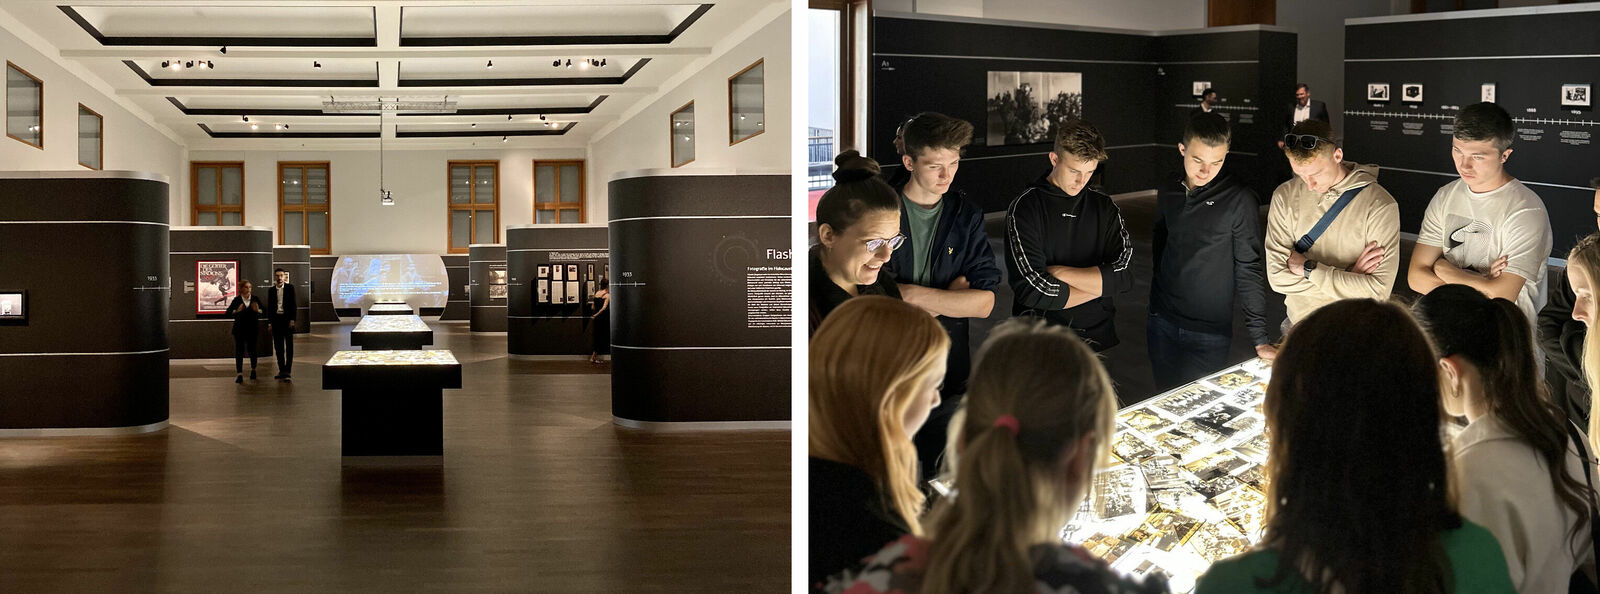 Preserving memory and promoting prevention:  Volkswagen apprentices visit “Flashes of Memory”  exhibition in Berlin